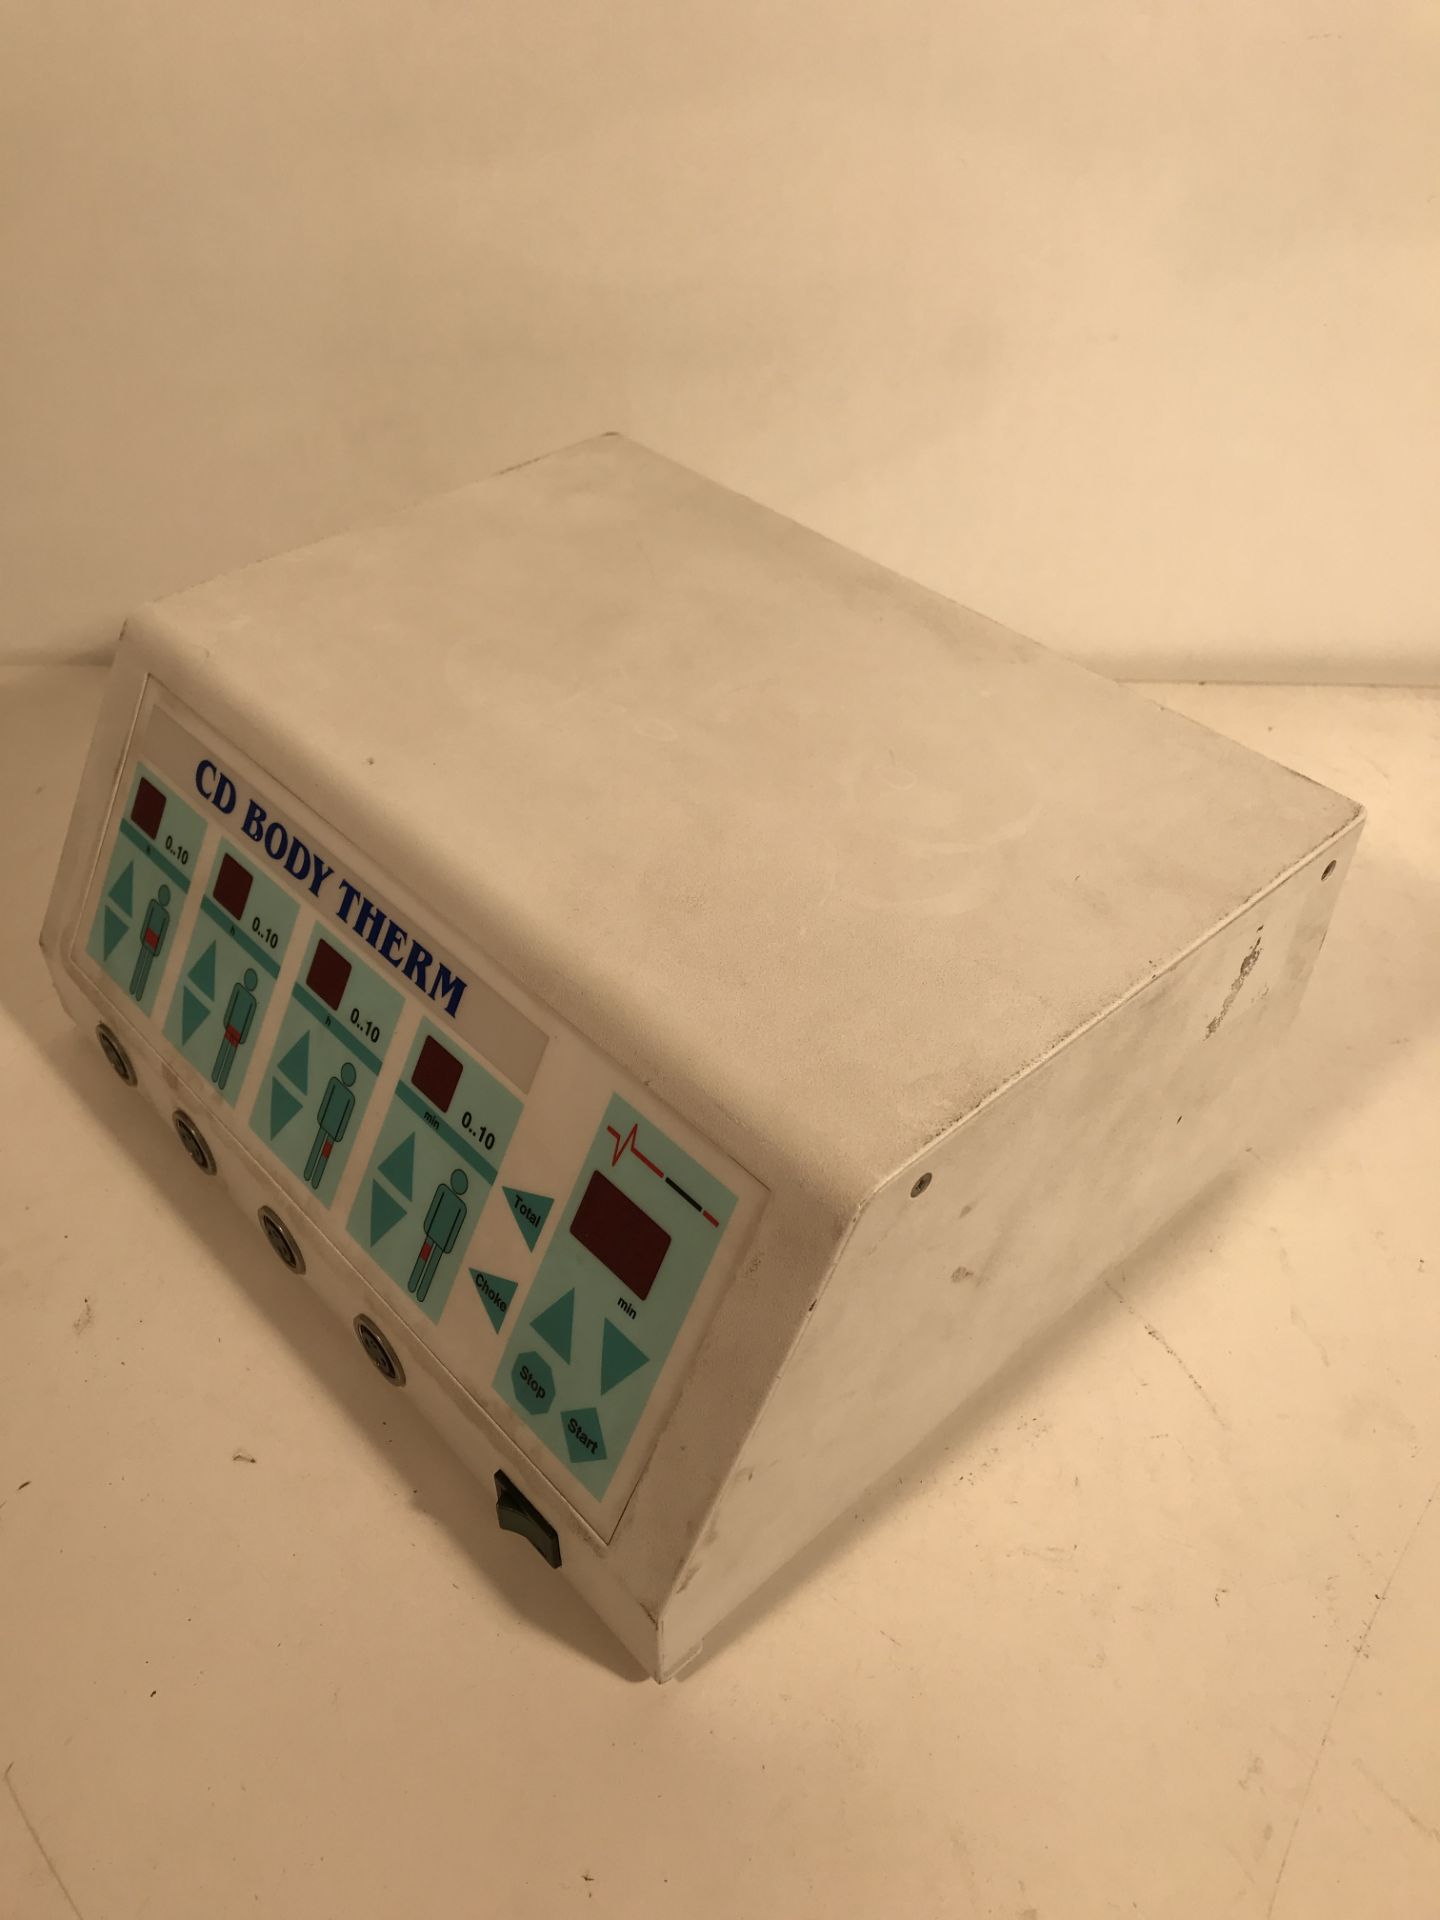 CD Body Therm Machine - Image 3 of 3